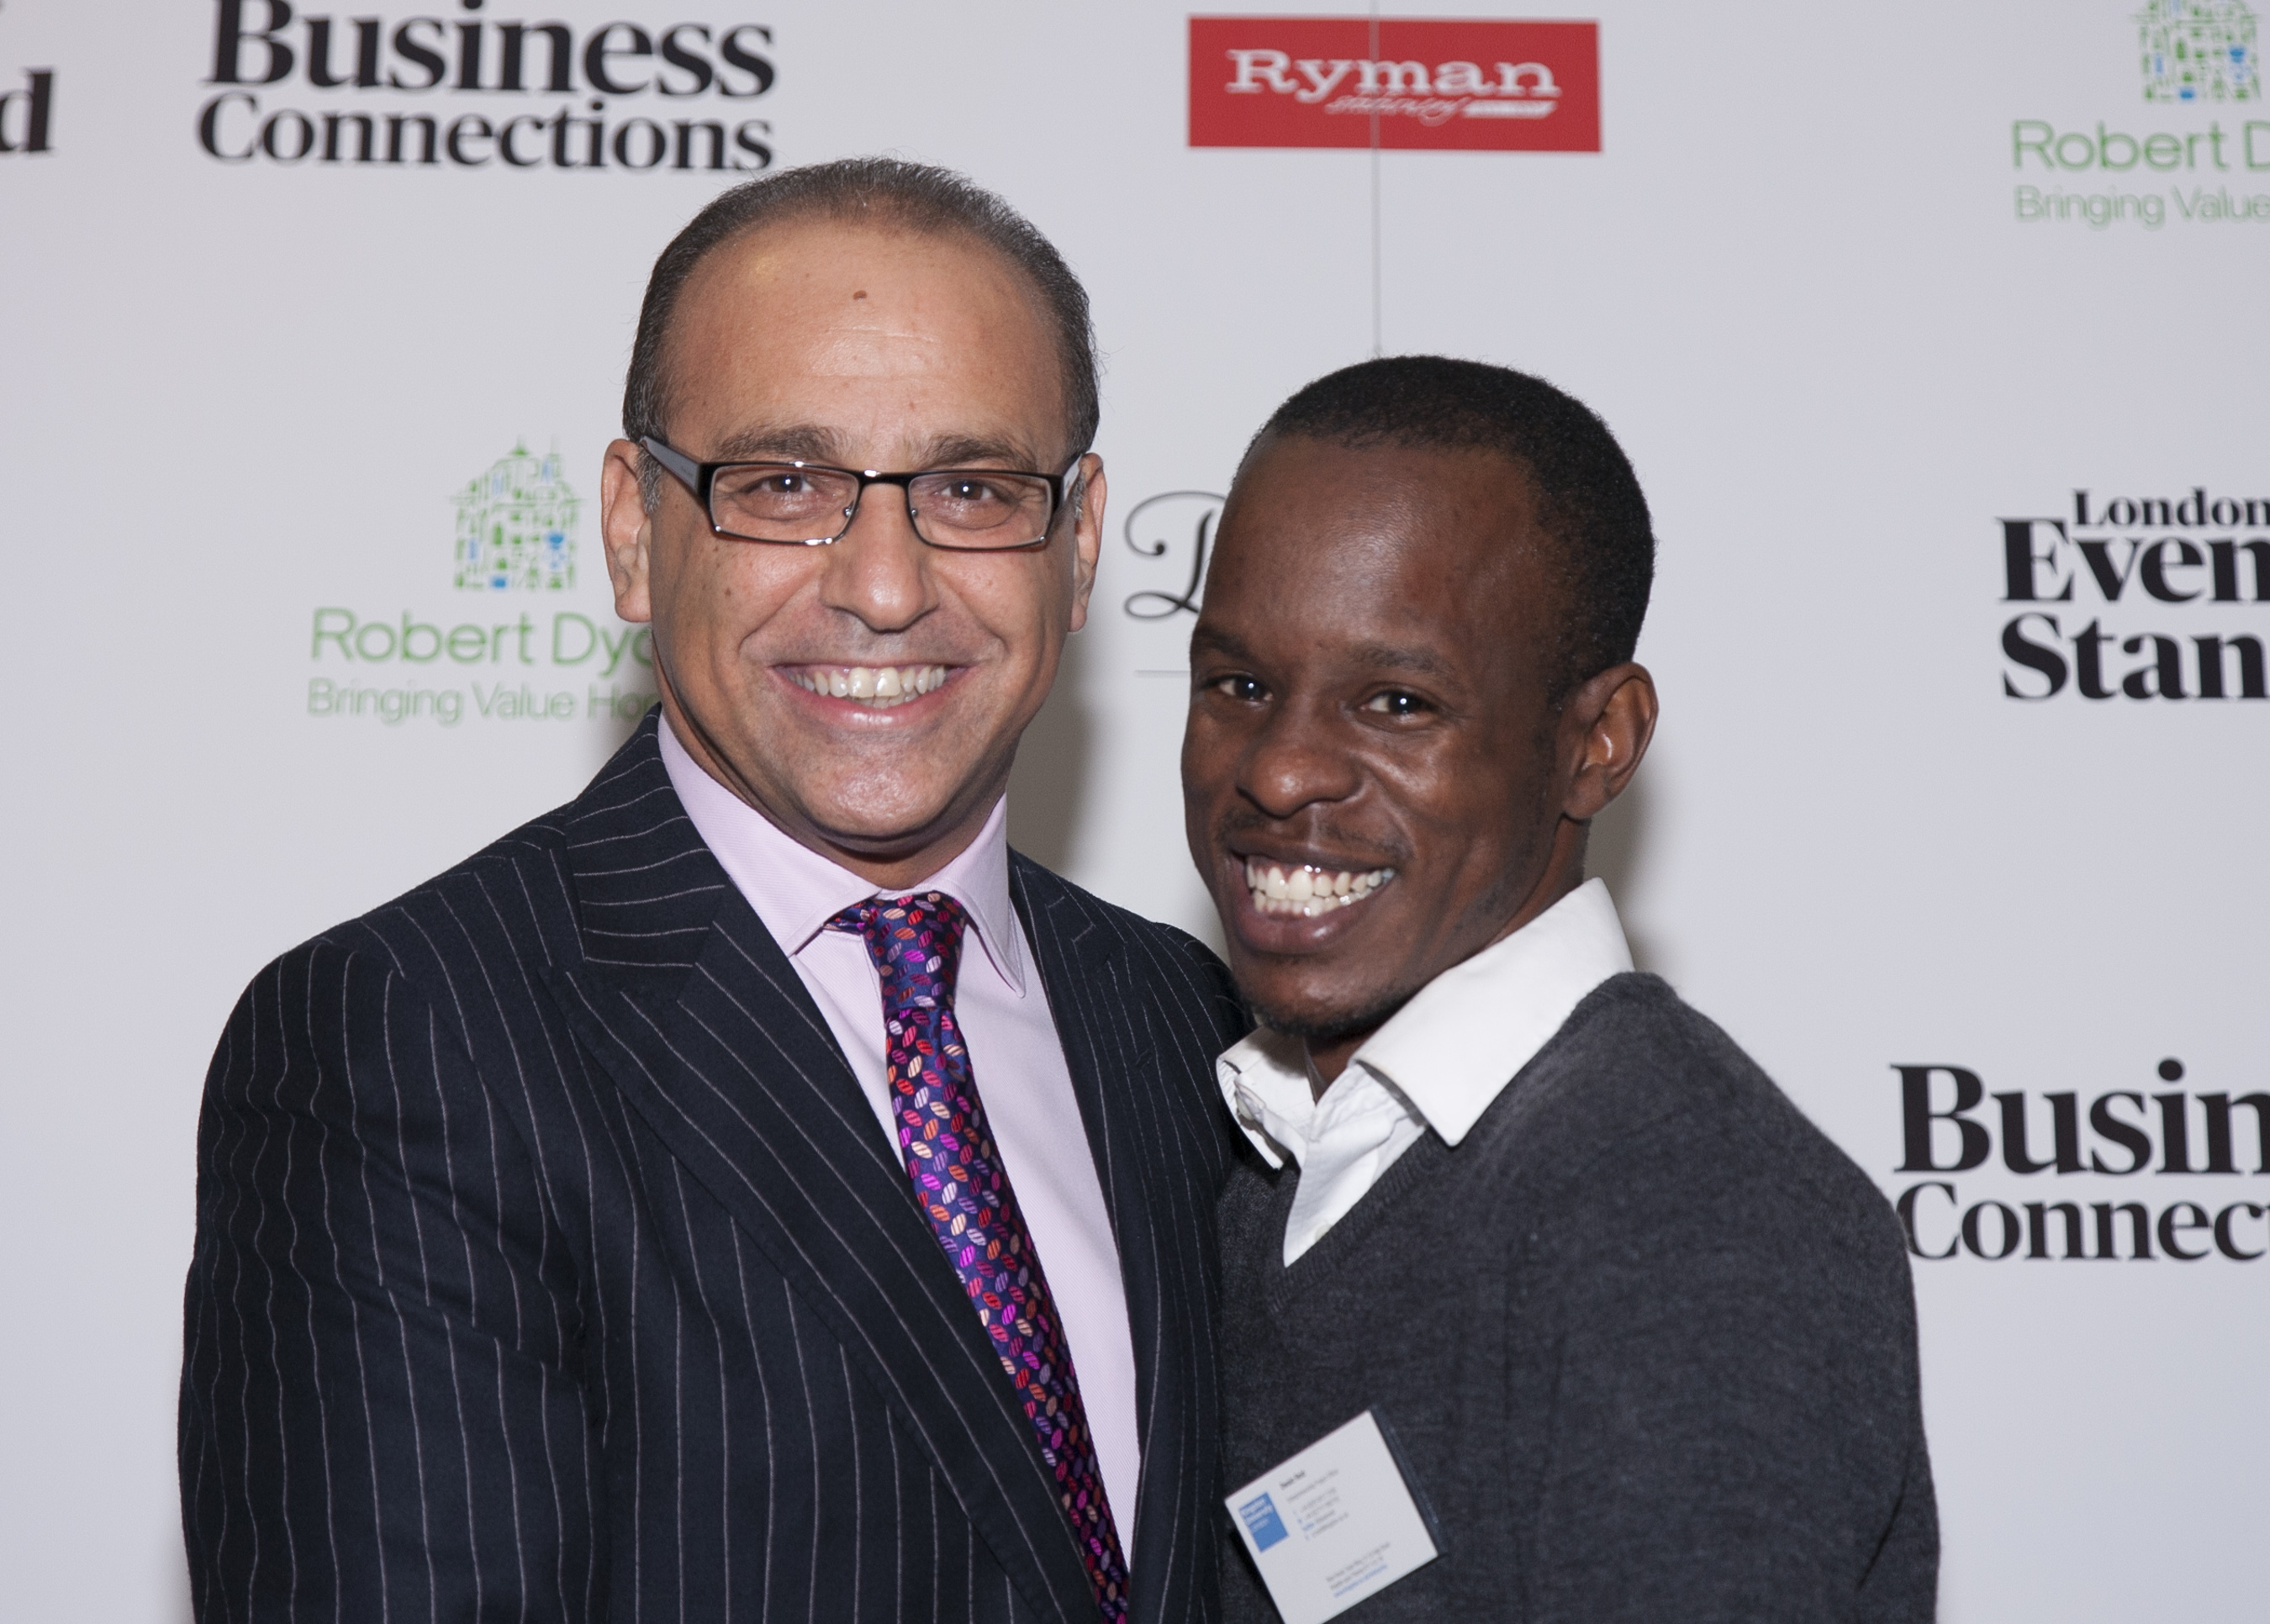 Evening Standard With Theo Paphitis 9.2012